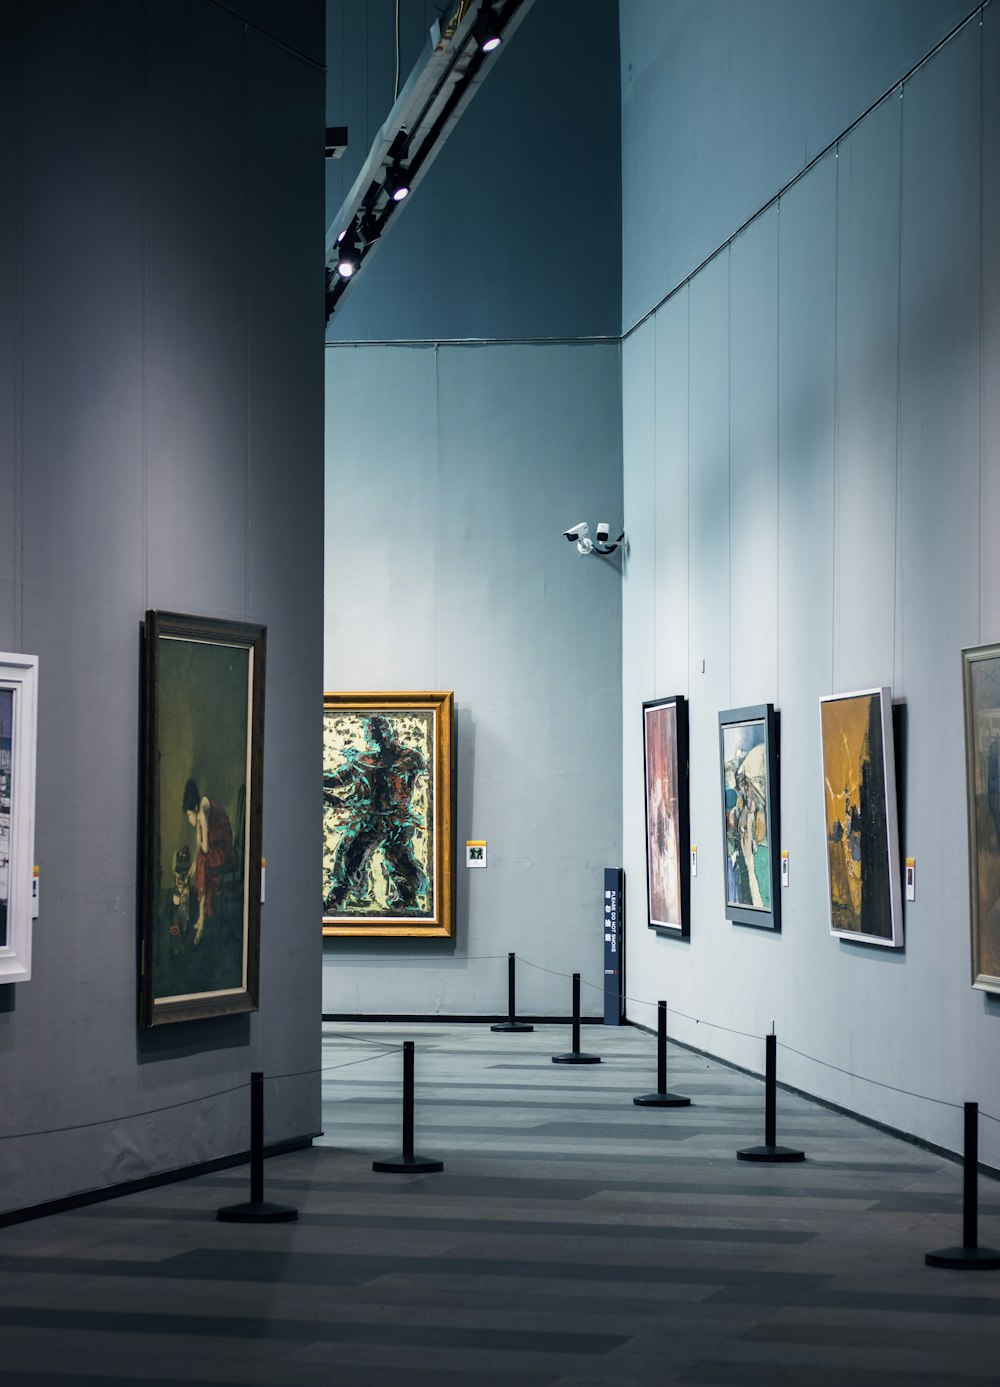 100+ Art Gallery Pictures | Download Free Images on Unsplash